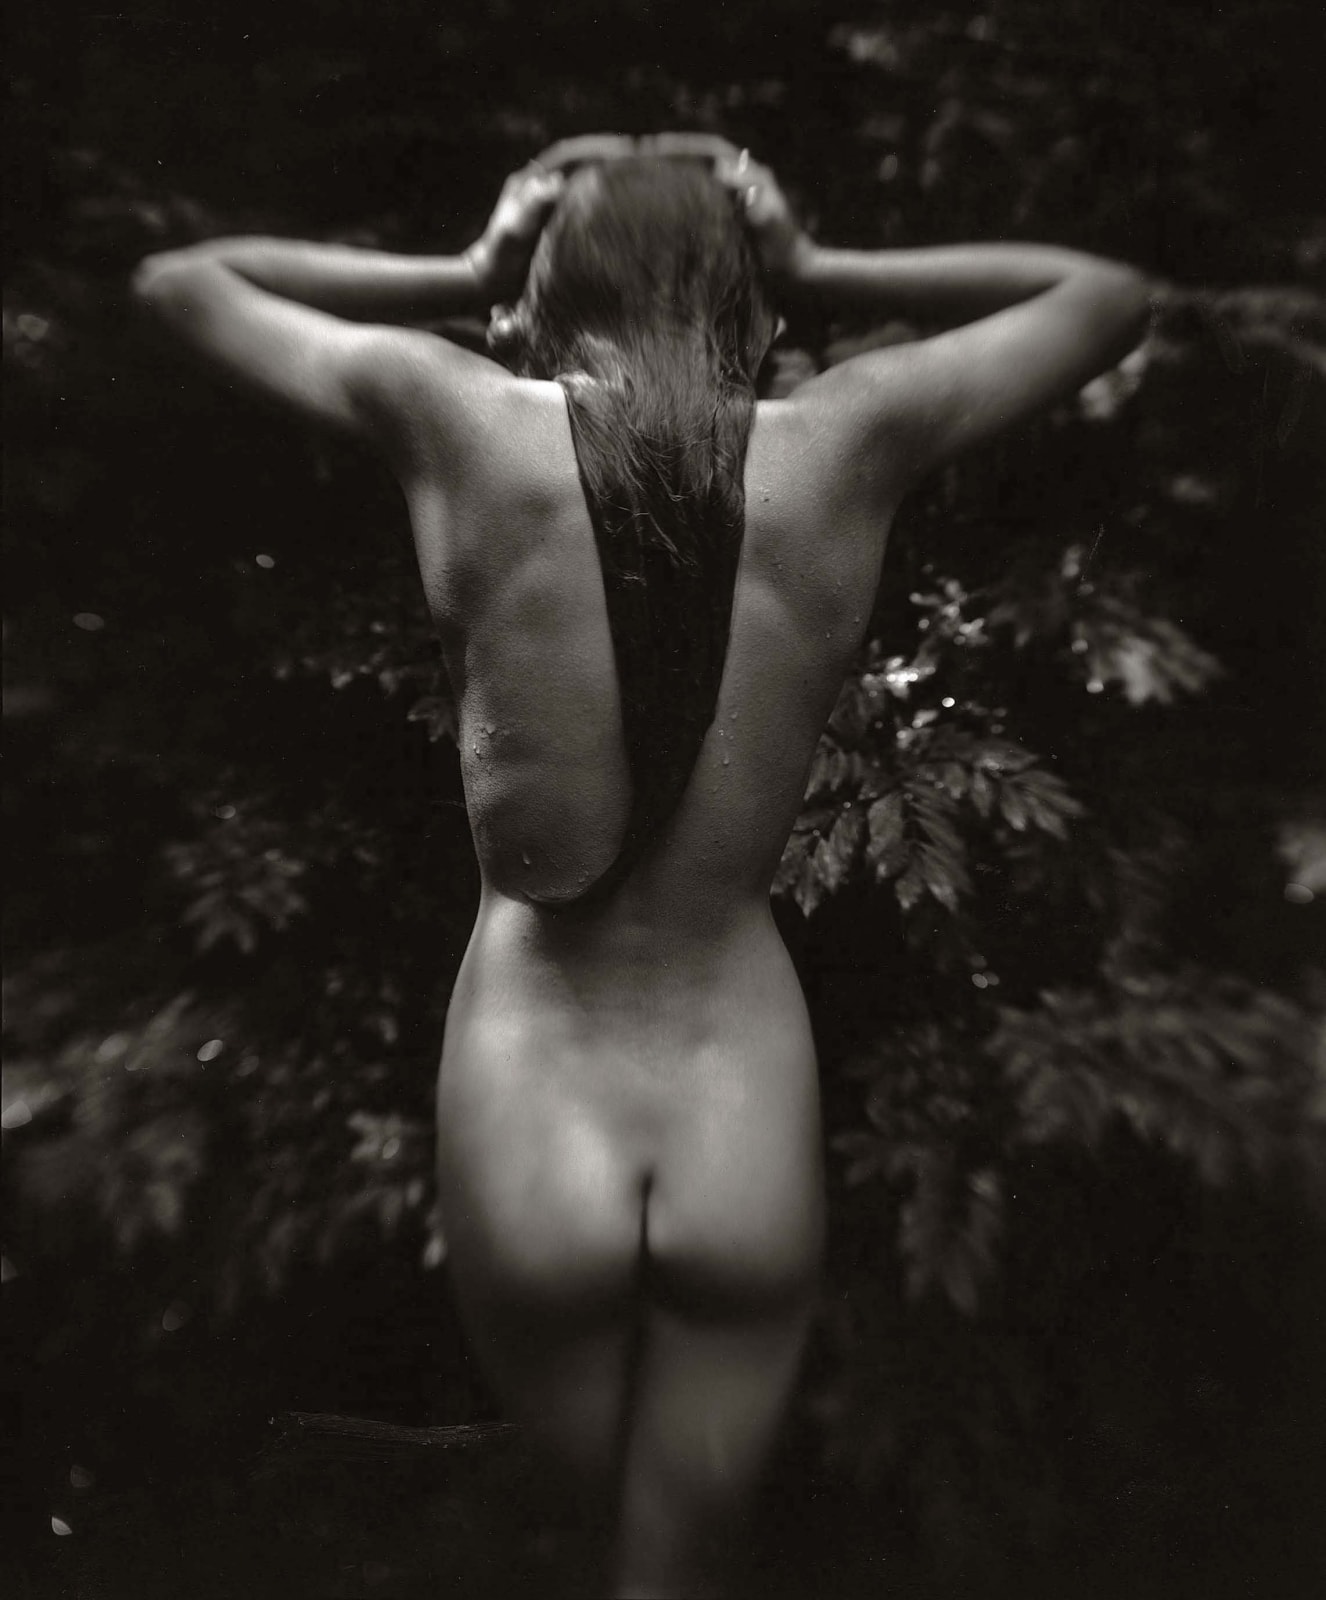 Punctus, Jessie from behind with hands on head, from the Immediate Family series by Sally Mann